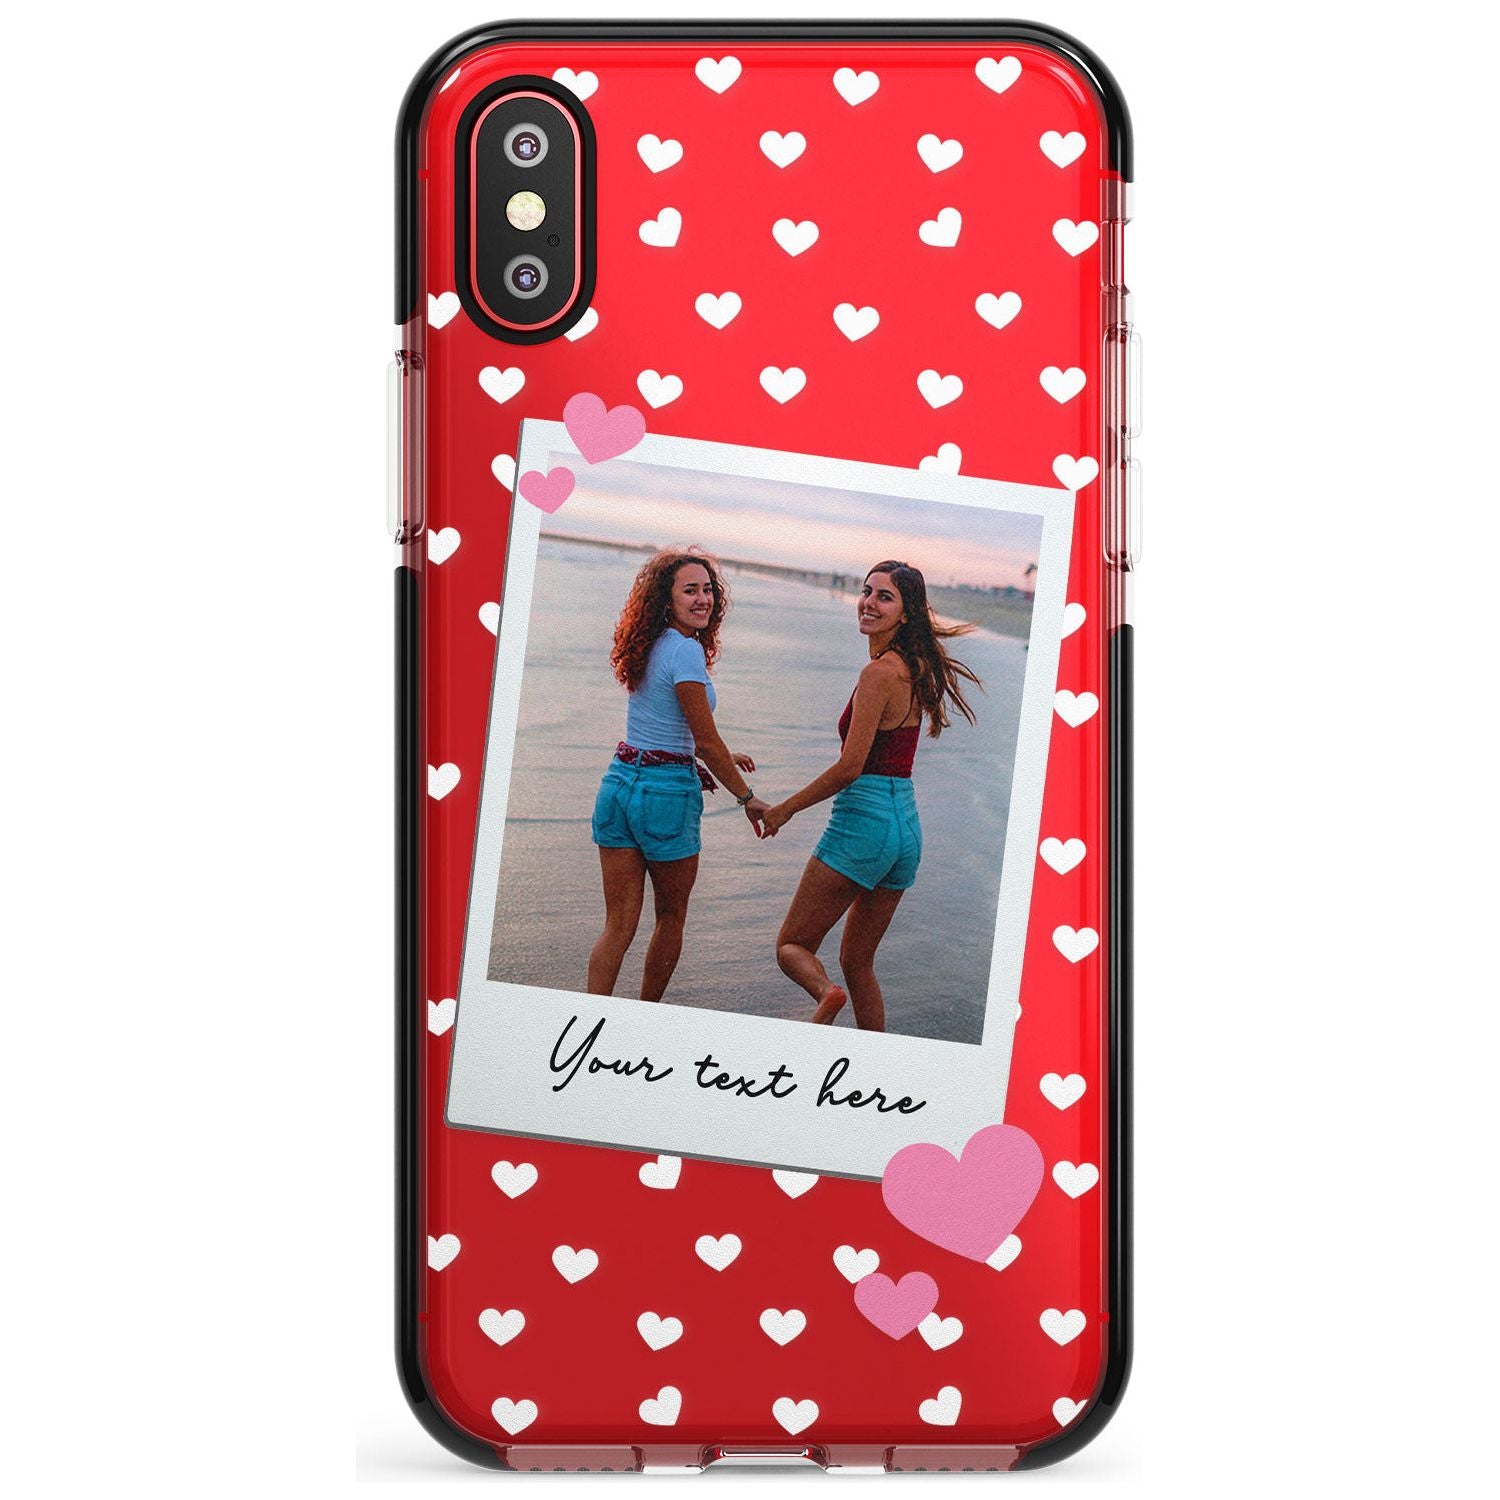 Instant Film & Hearts Pink Fade Impact Phone Case for iPhone X XS Max XR